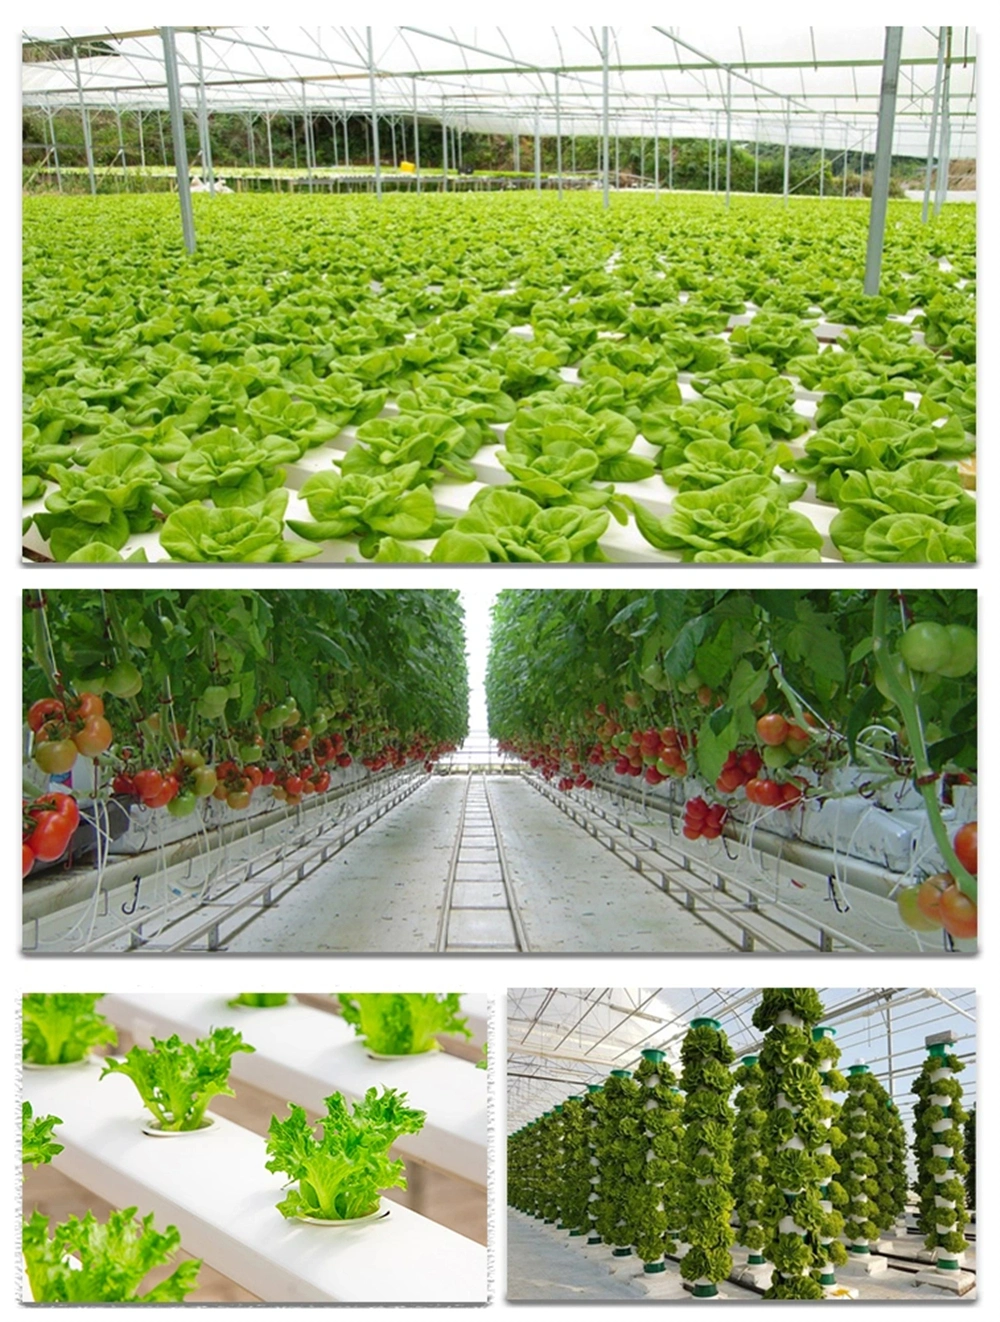 China Factory Leading Film Greenhouse for Commercial/Agricultural/Vertical Farming/Hydroponic Growing/Flower/Cucumber/Tomato